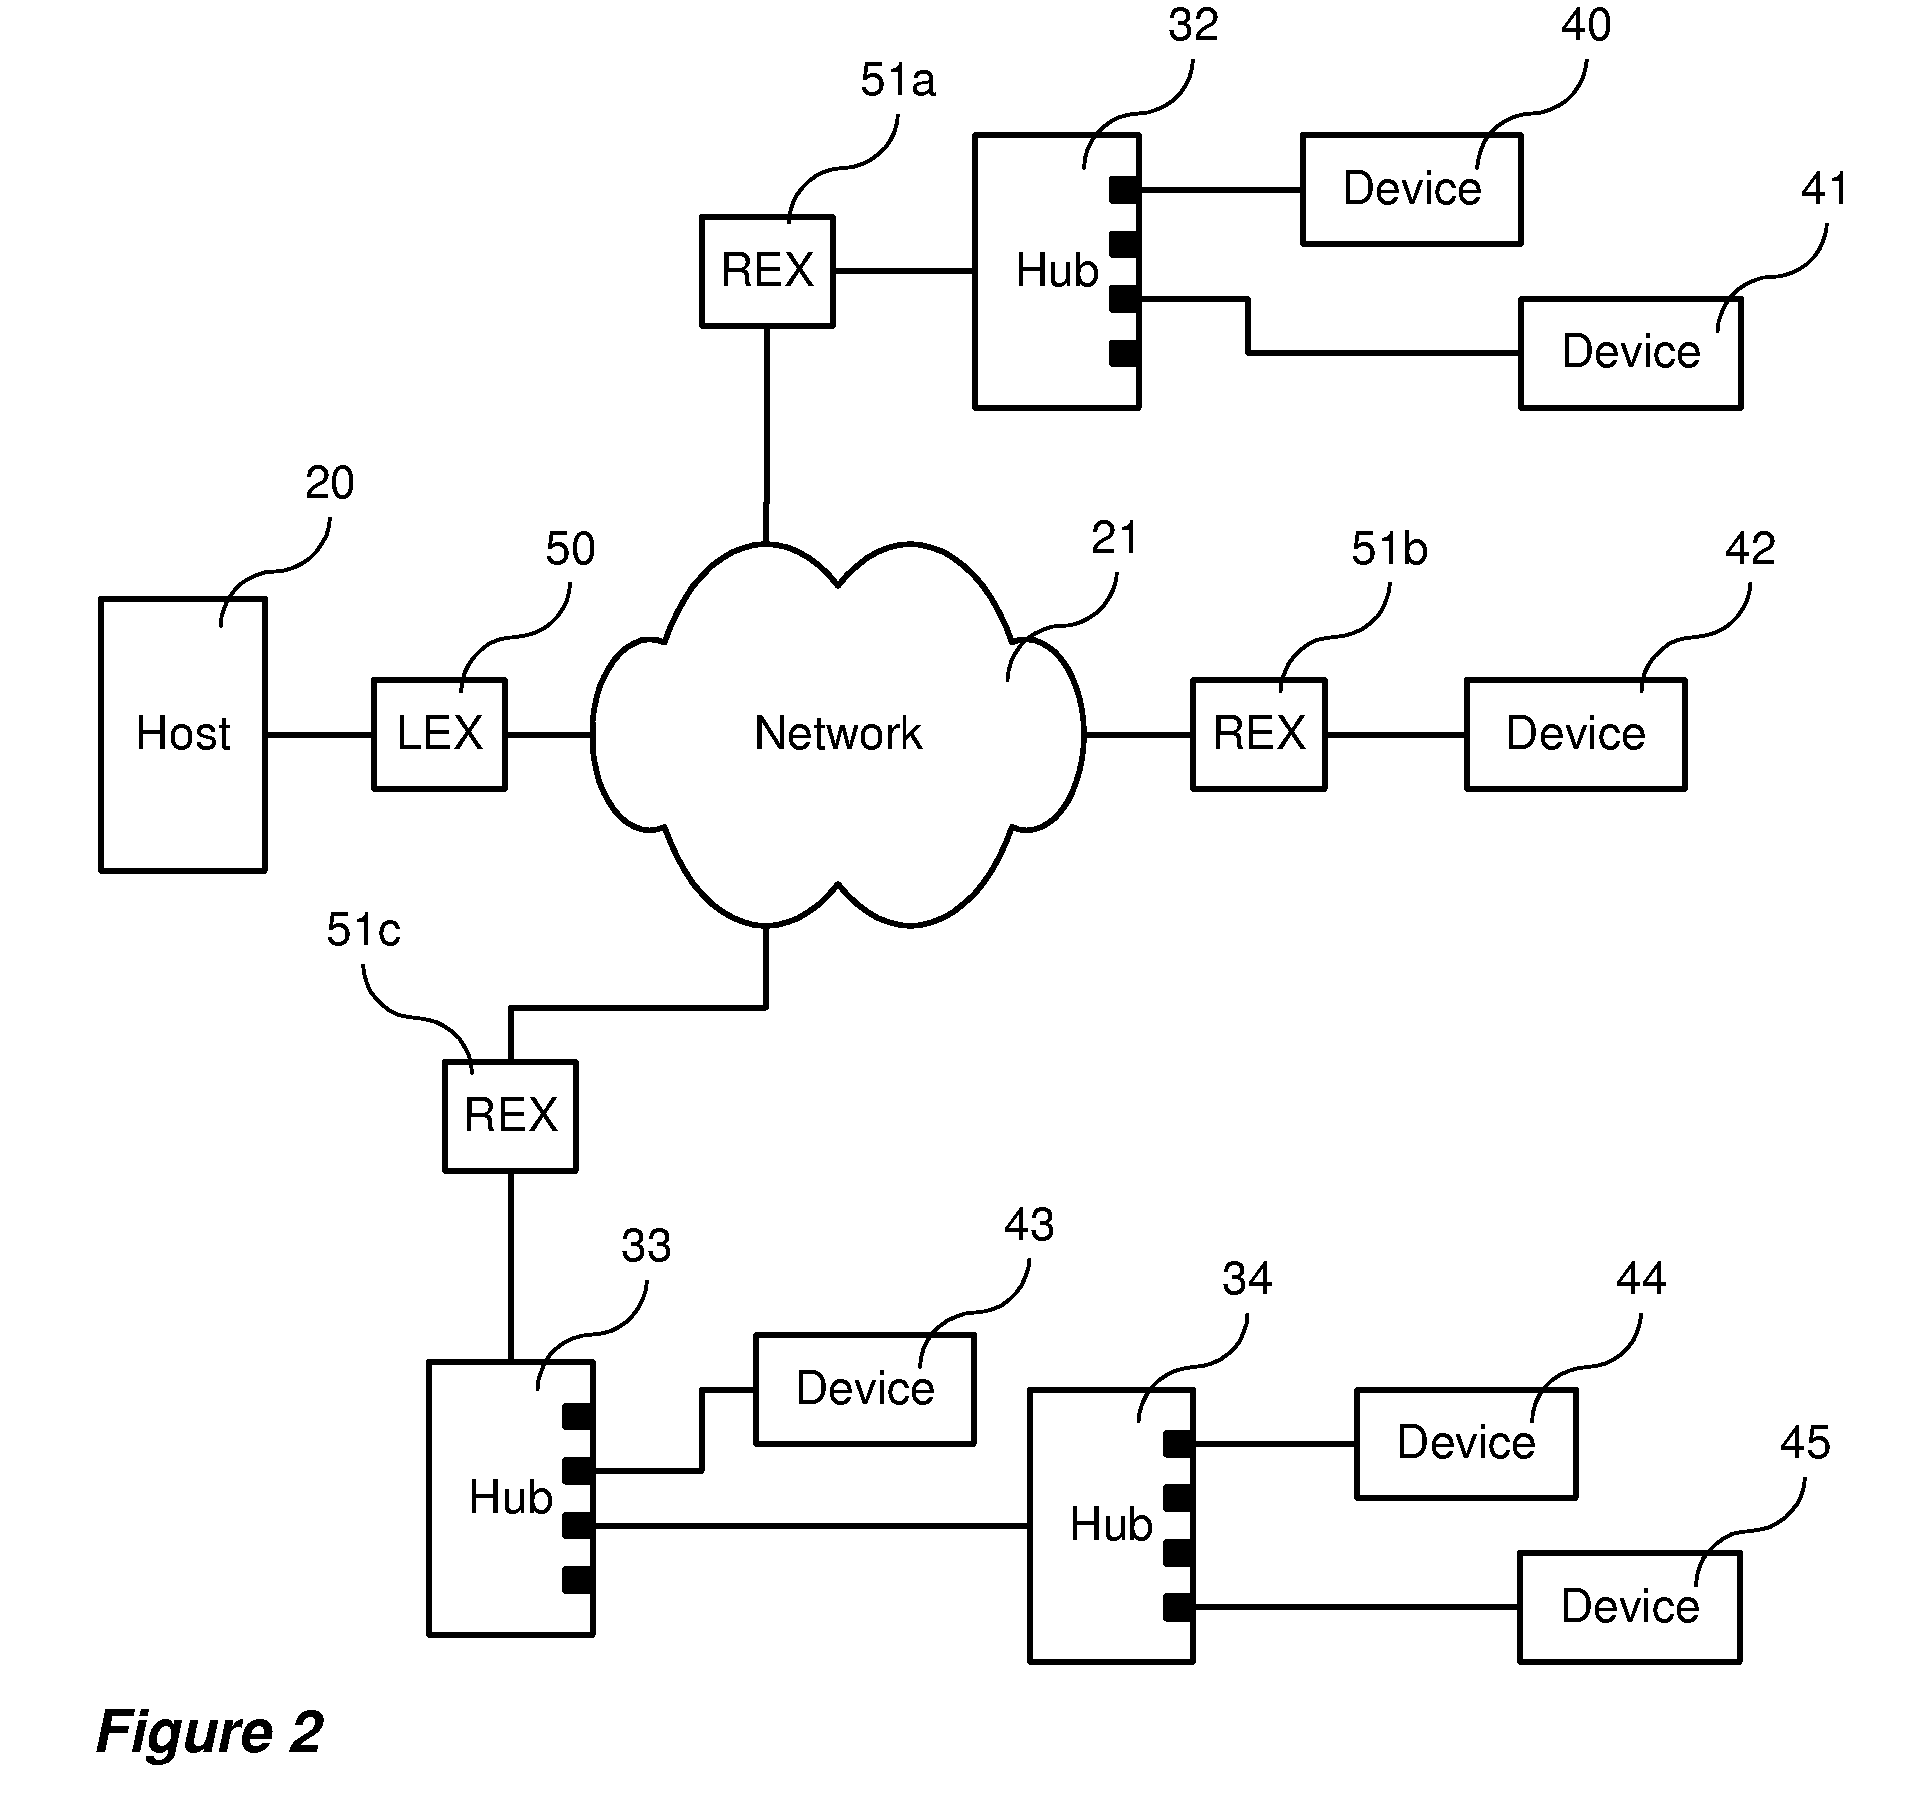 Method and apparatus for distributing USB hub functions across a network